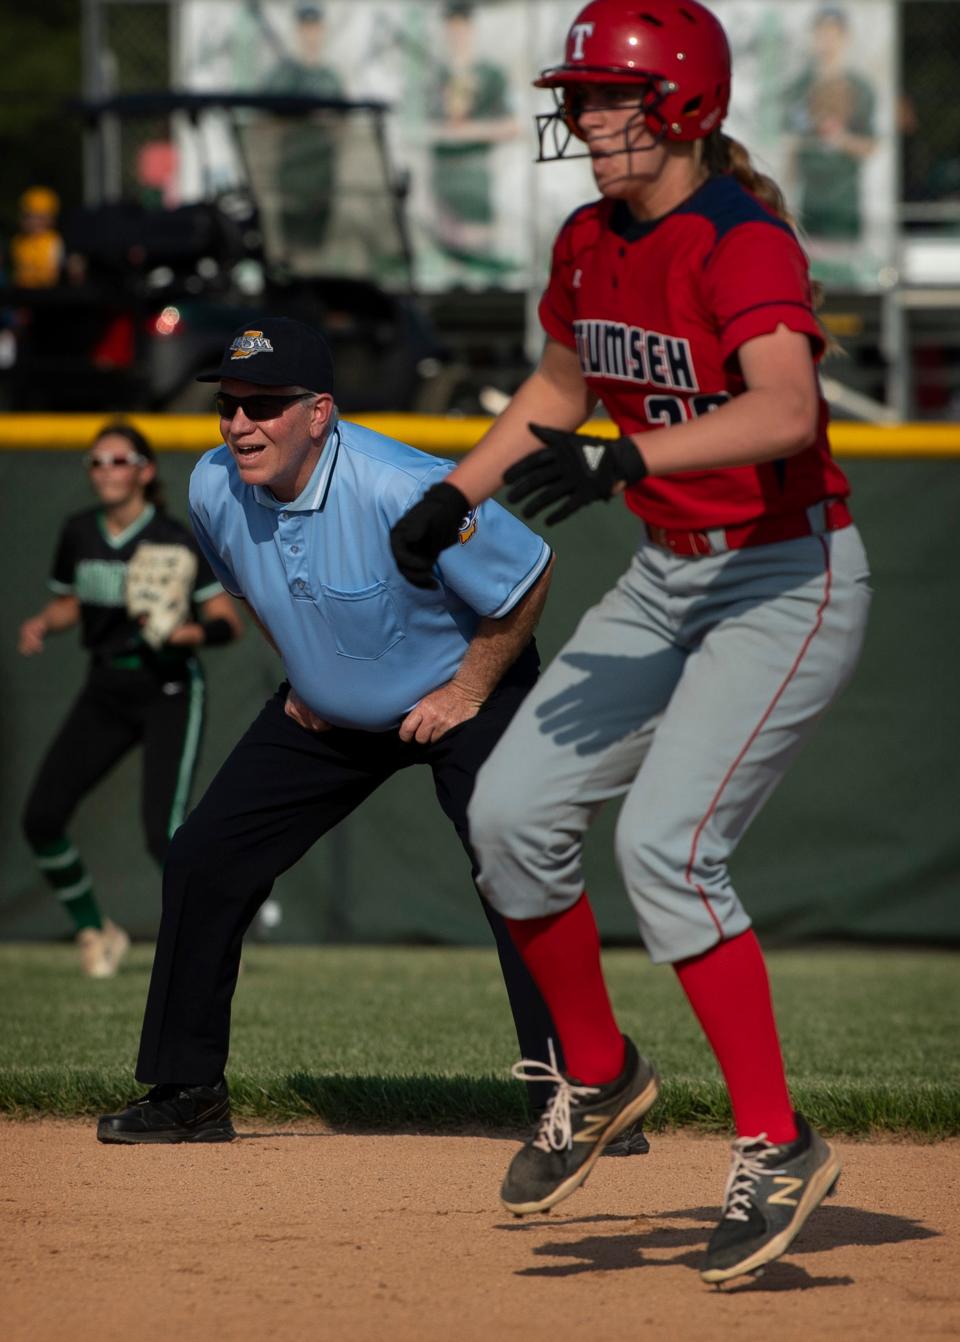 Umpire Russ Carlisle of Evansville officiates a game between North and Tecumseh at North High School in Evansville, Ind., Tuesday evening, May 10, 2022.